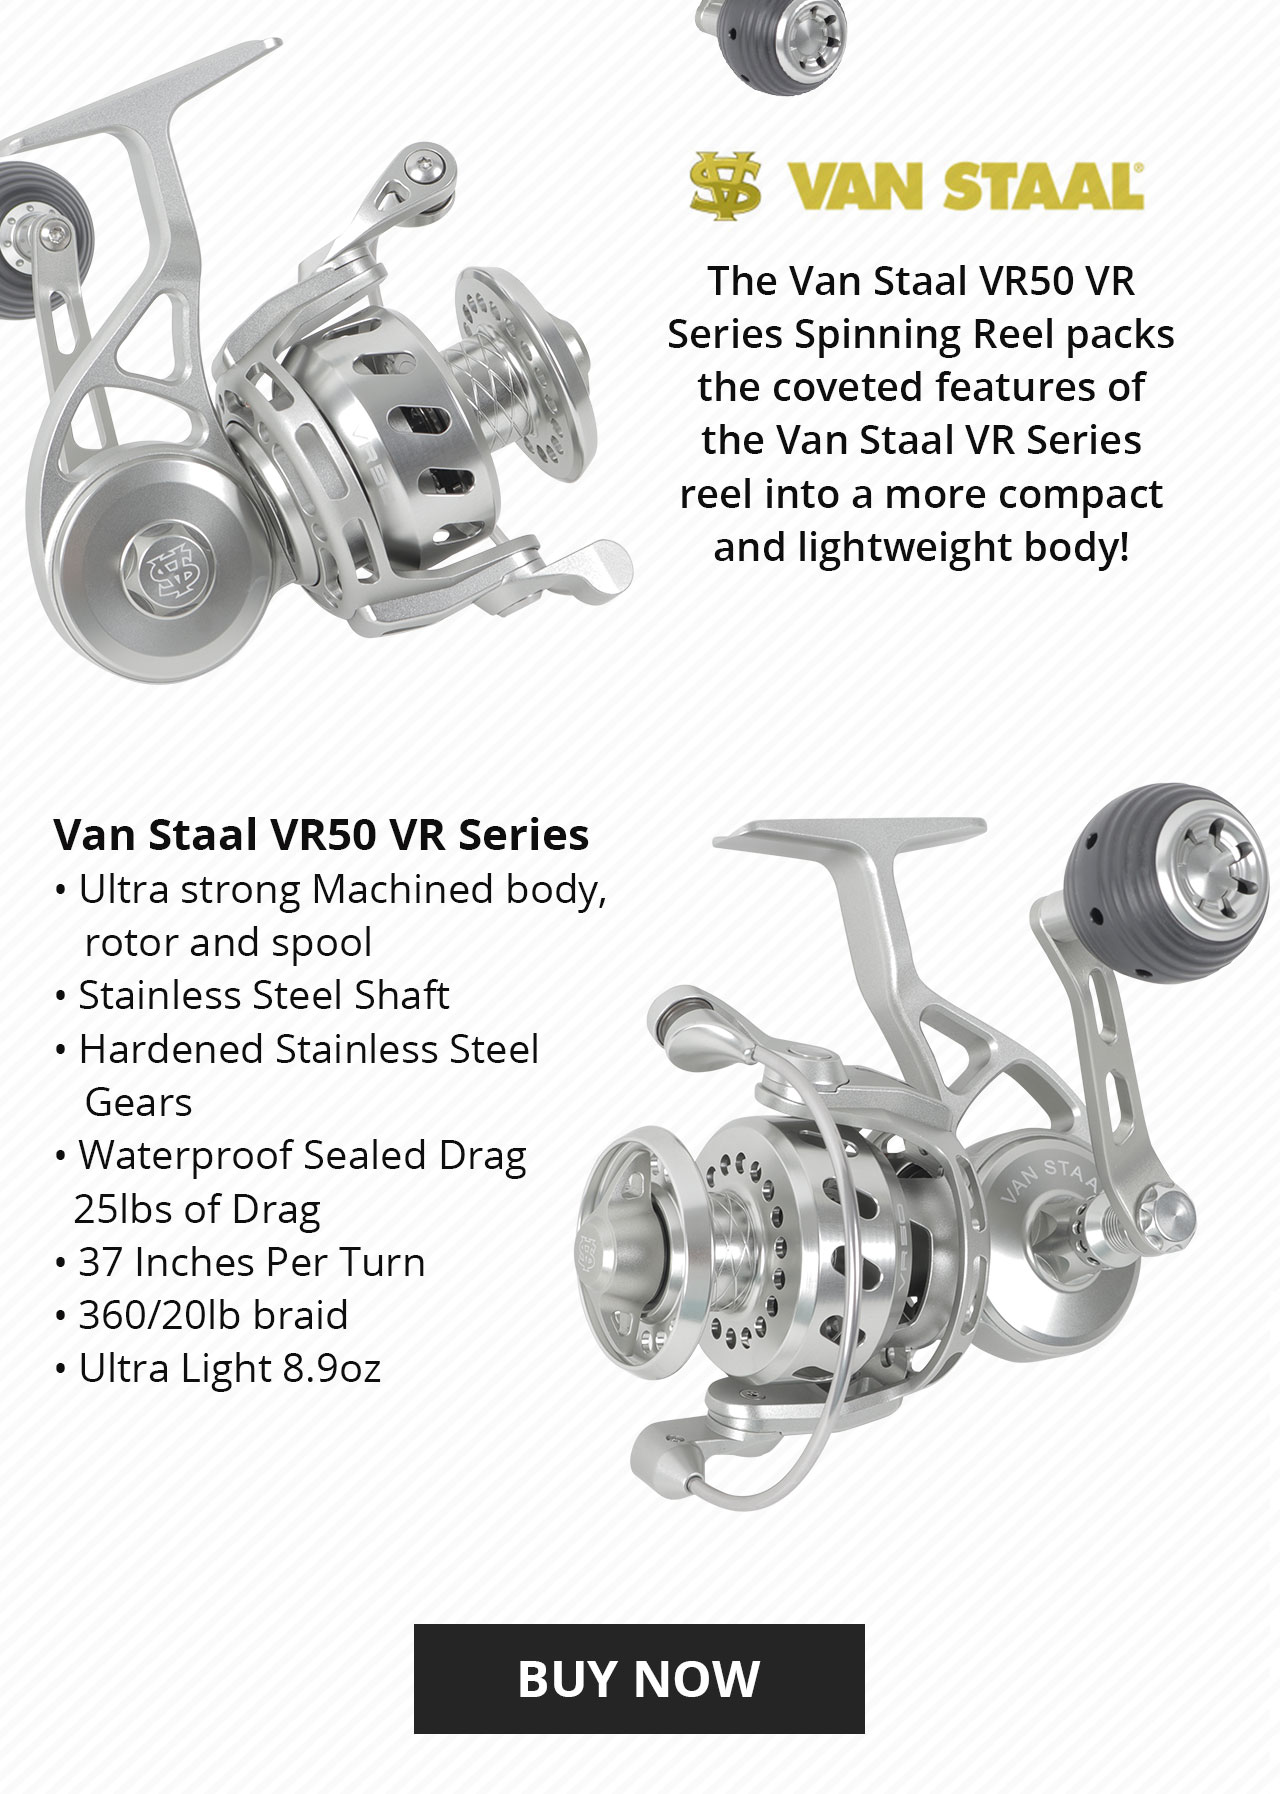 ✓ Van Staal VR50 Now IN-STOCK! - TackleDirect Email Archive